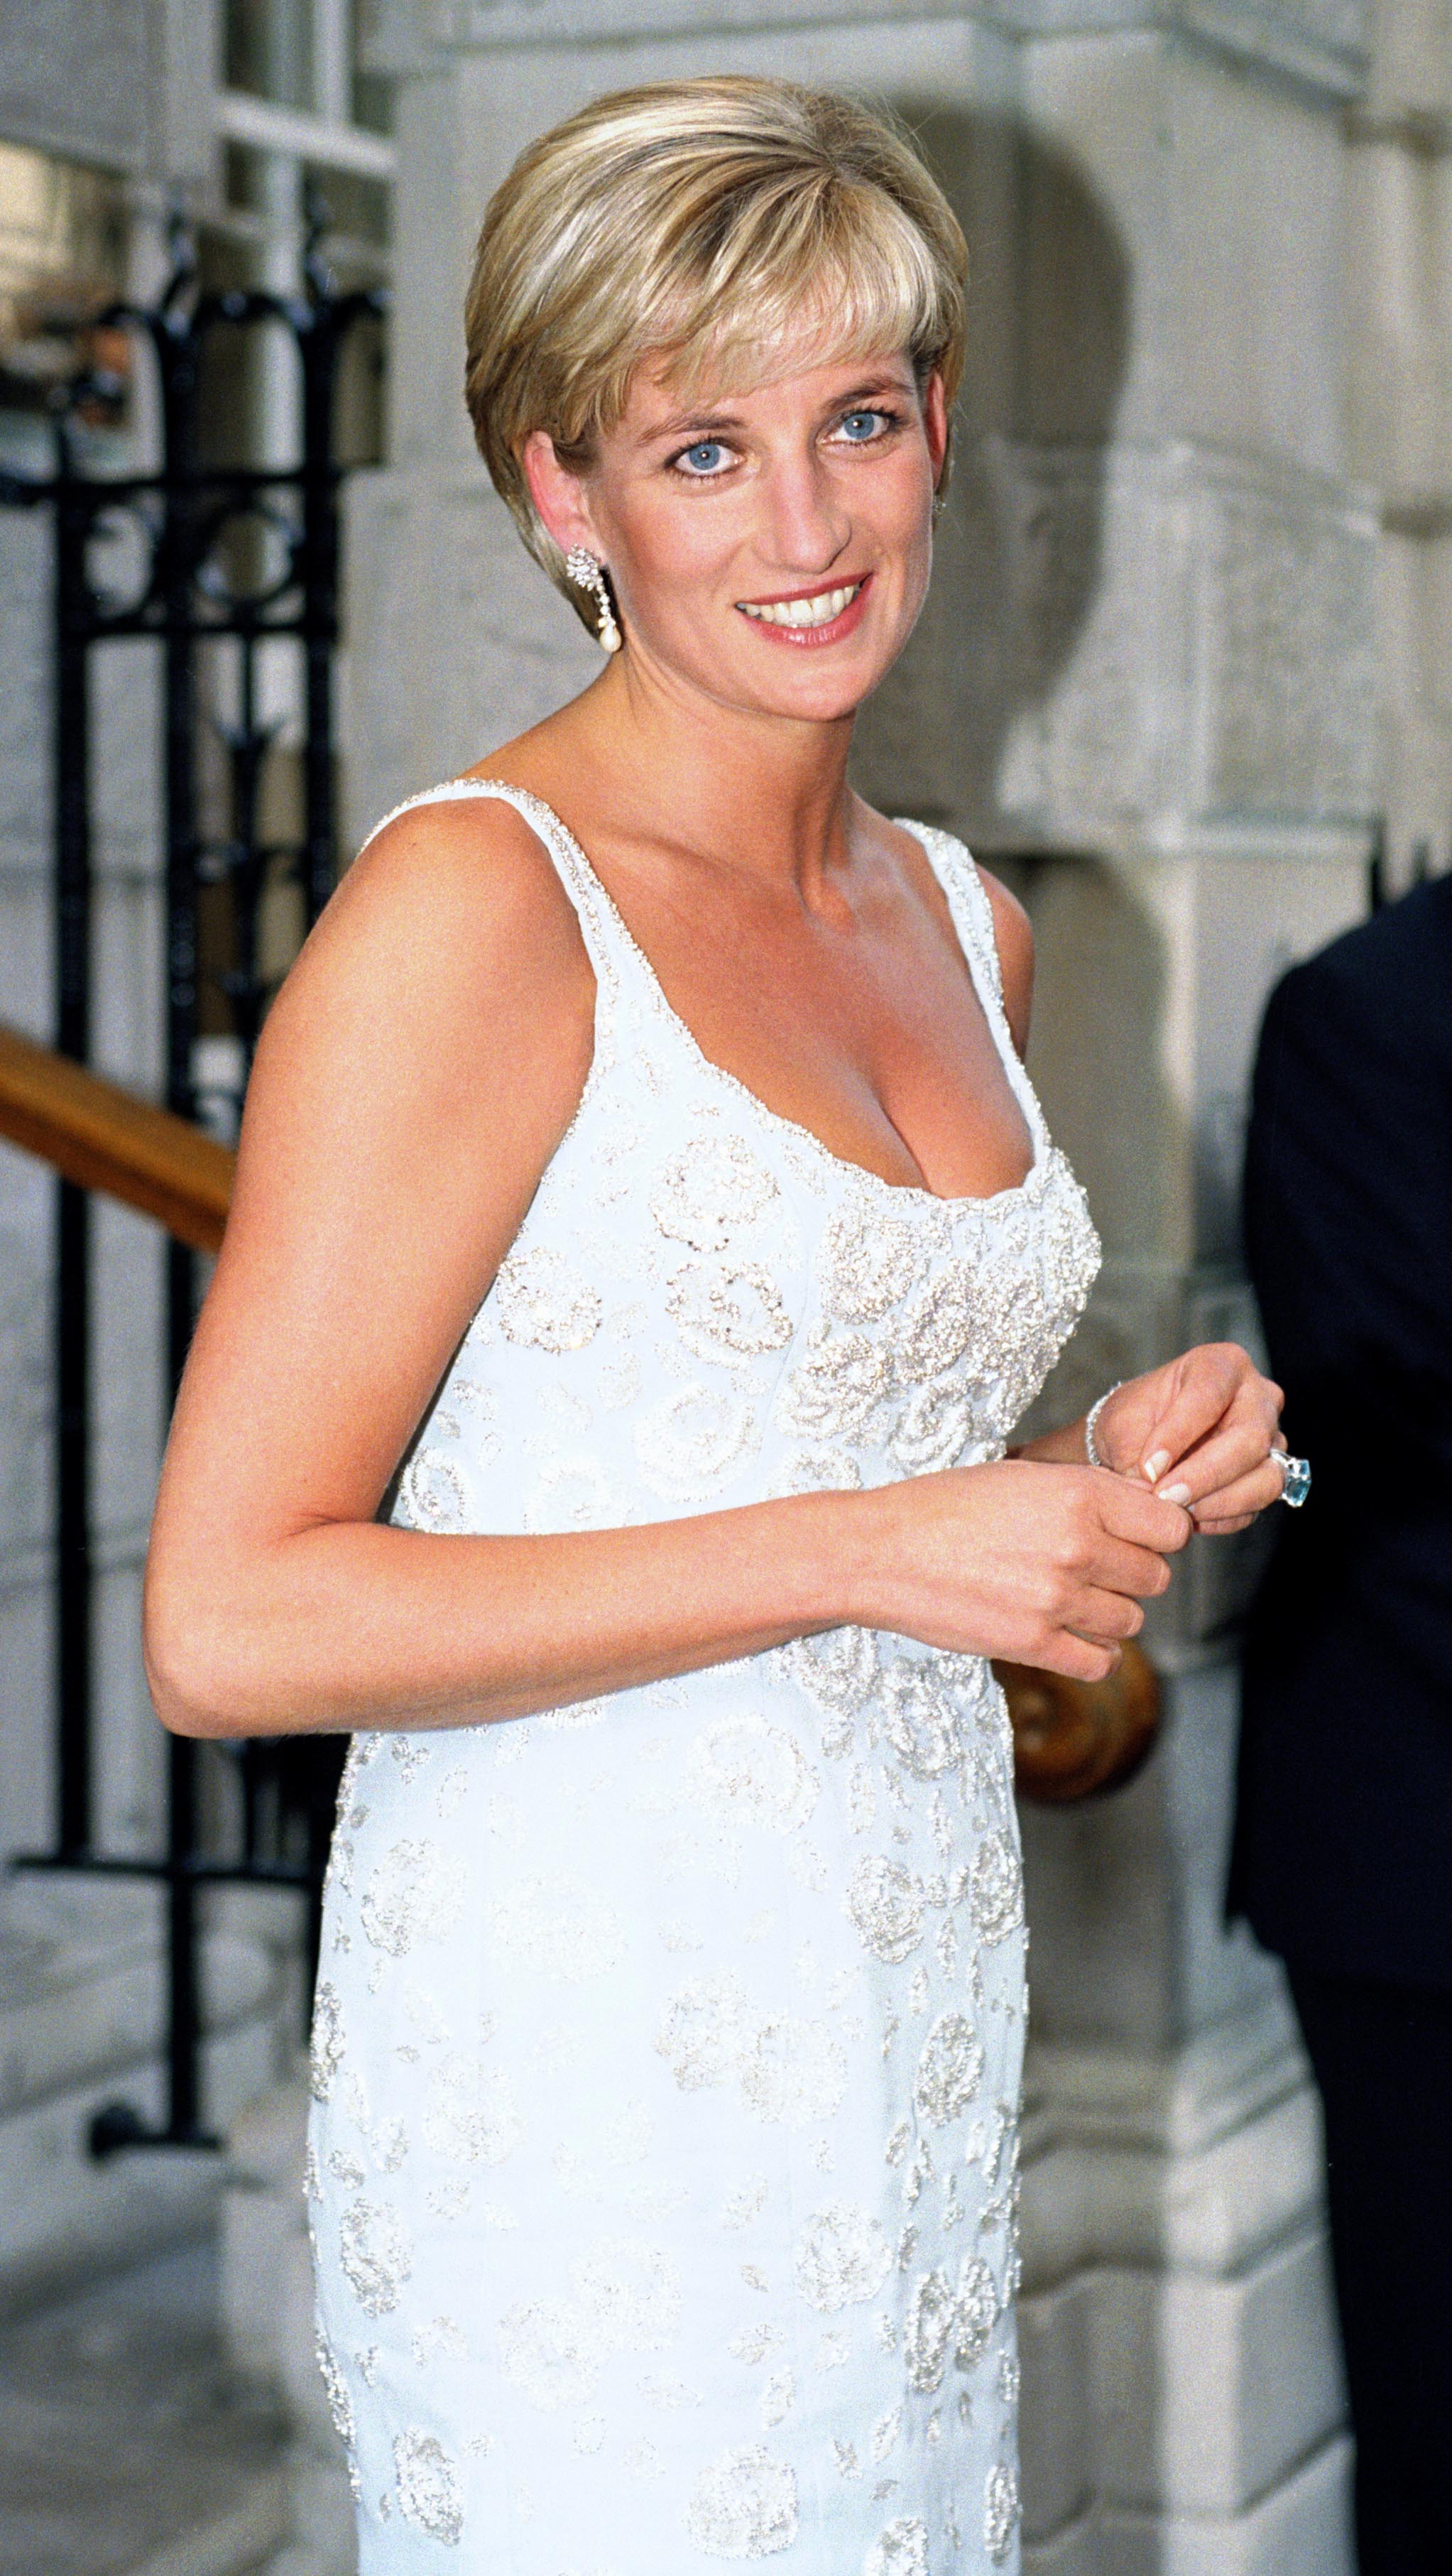 Diana The Princess Of Wales Attends A Gala Reception in London. | Source: Getty Images